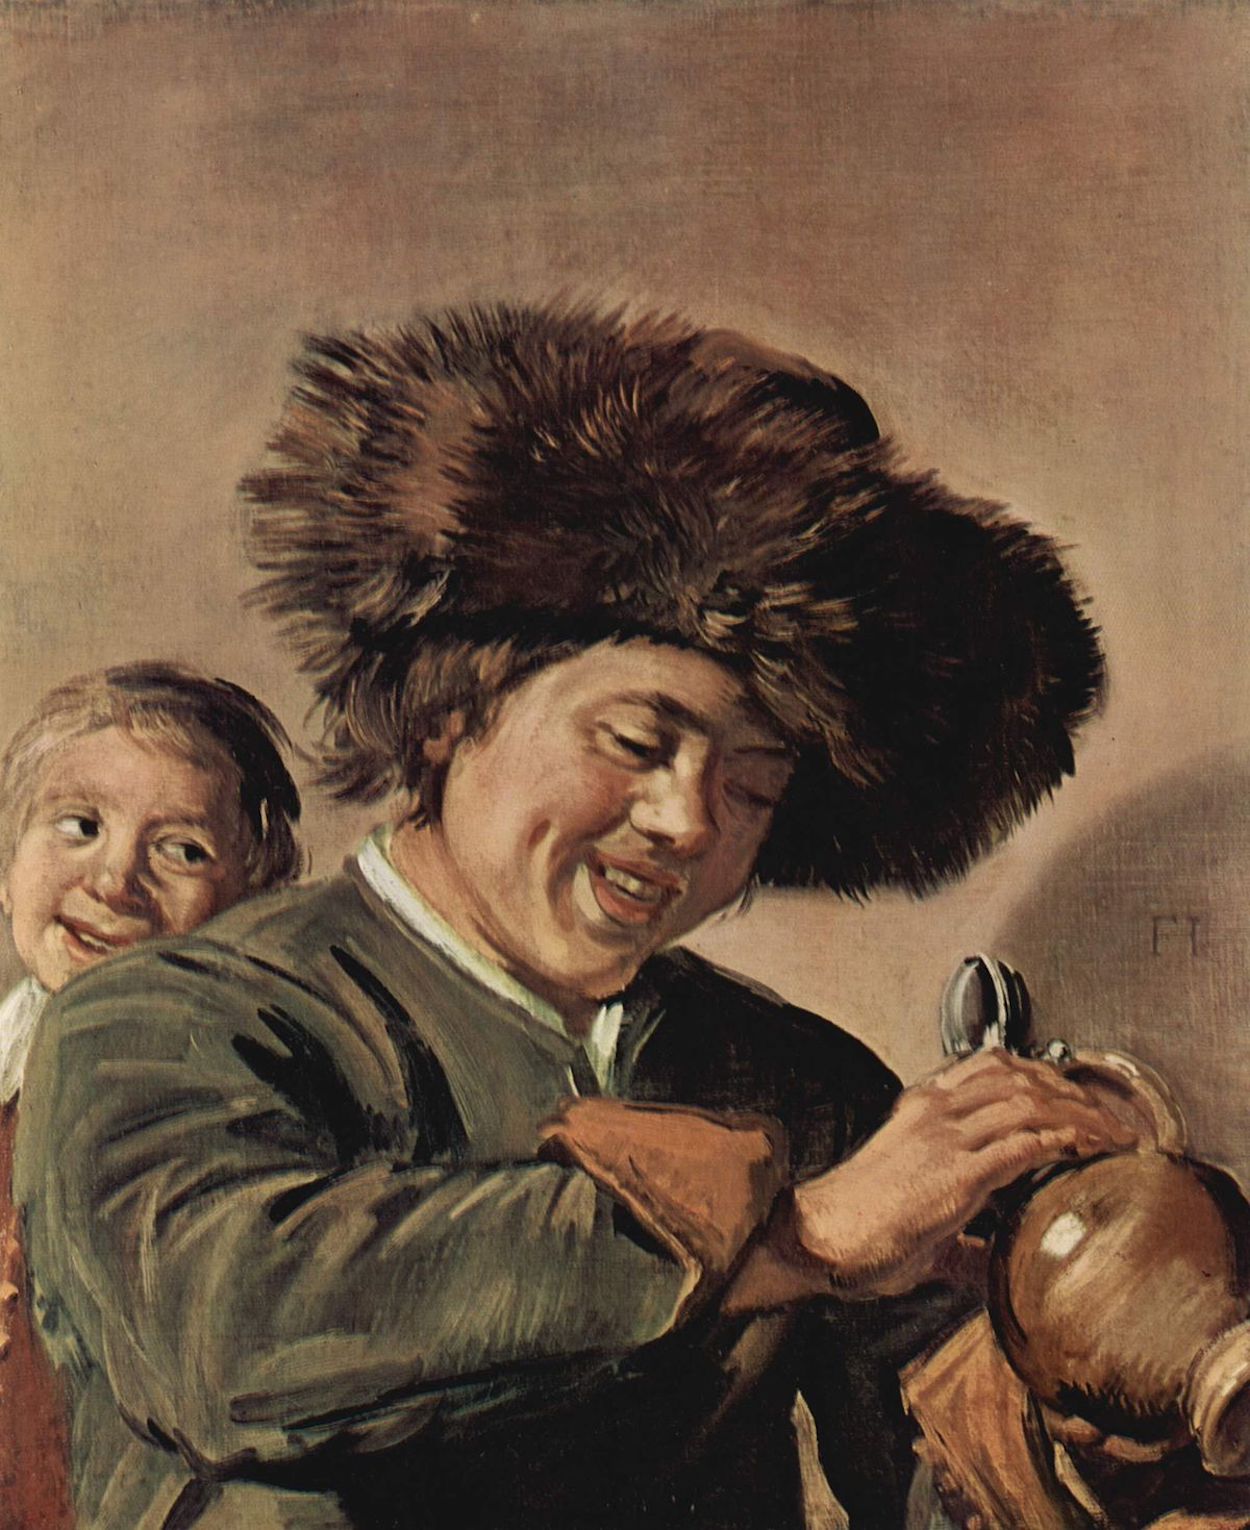 Two Laughing Boys with a Mug of Beer by Frans Hals - 1626 - 68 × 56.5 cm private collection